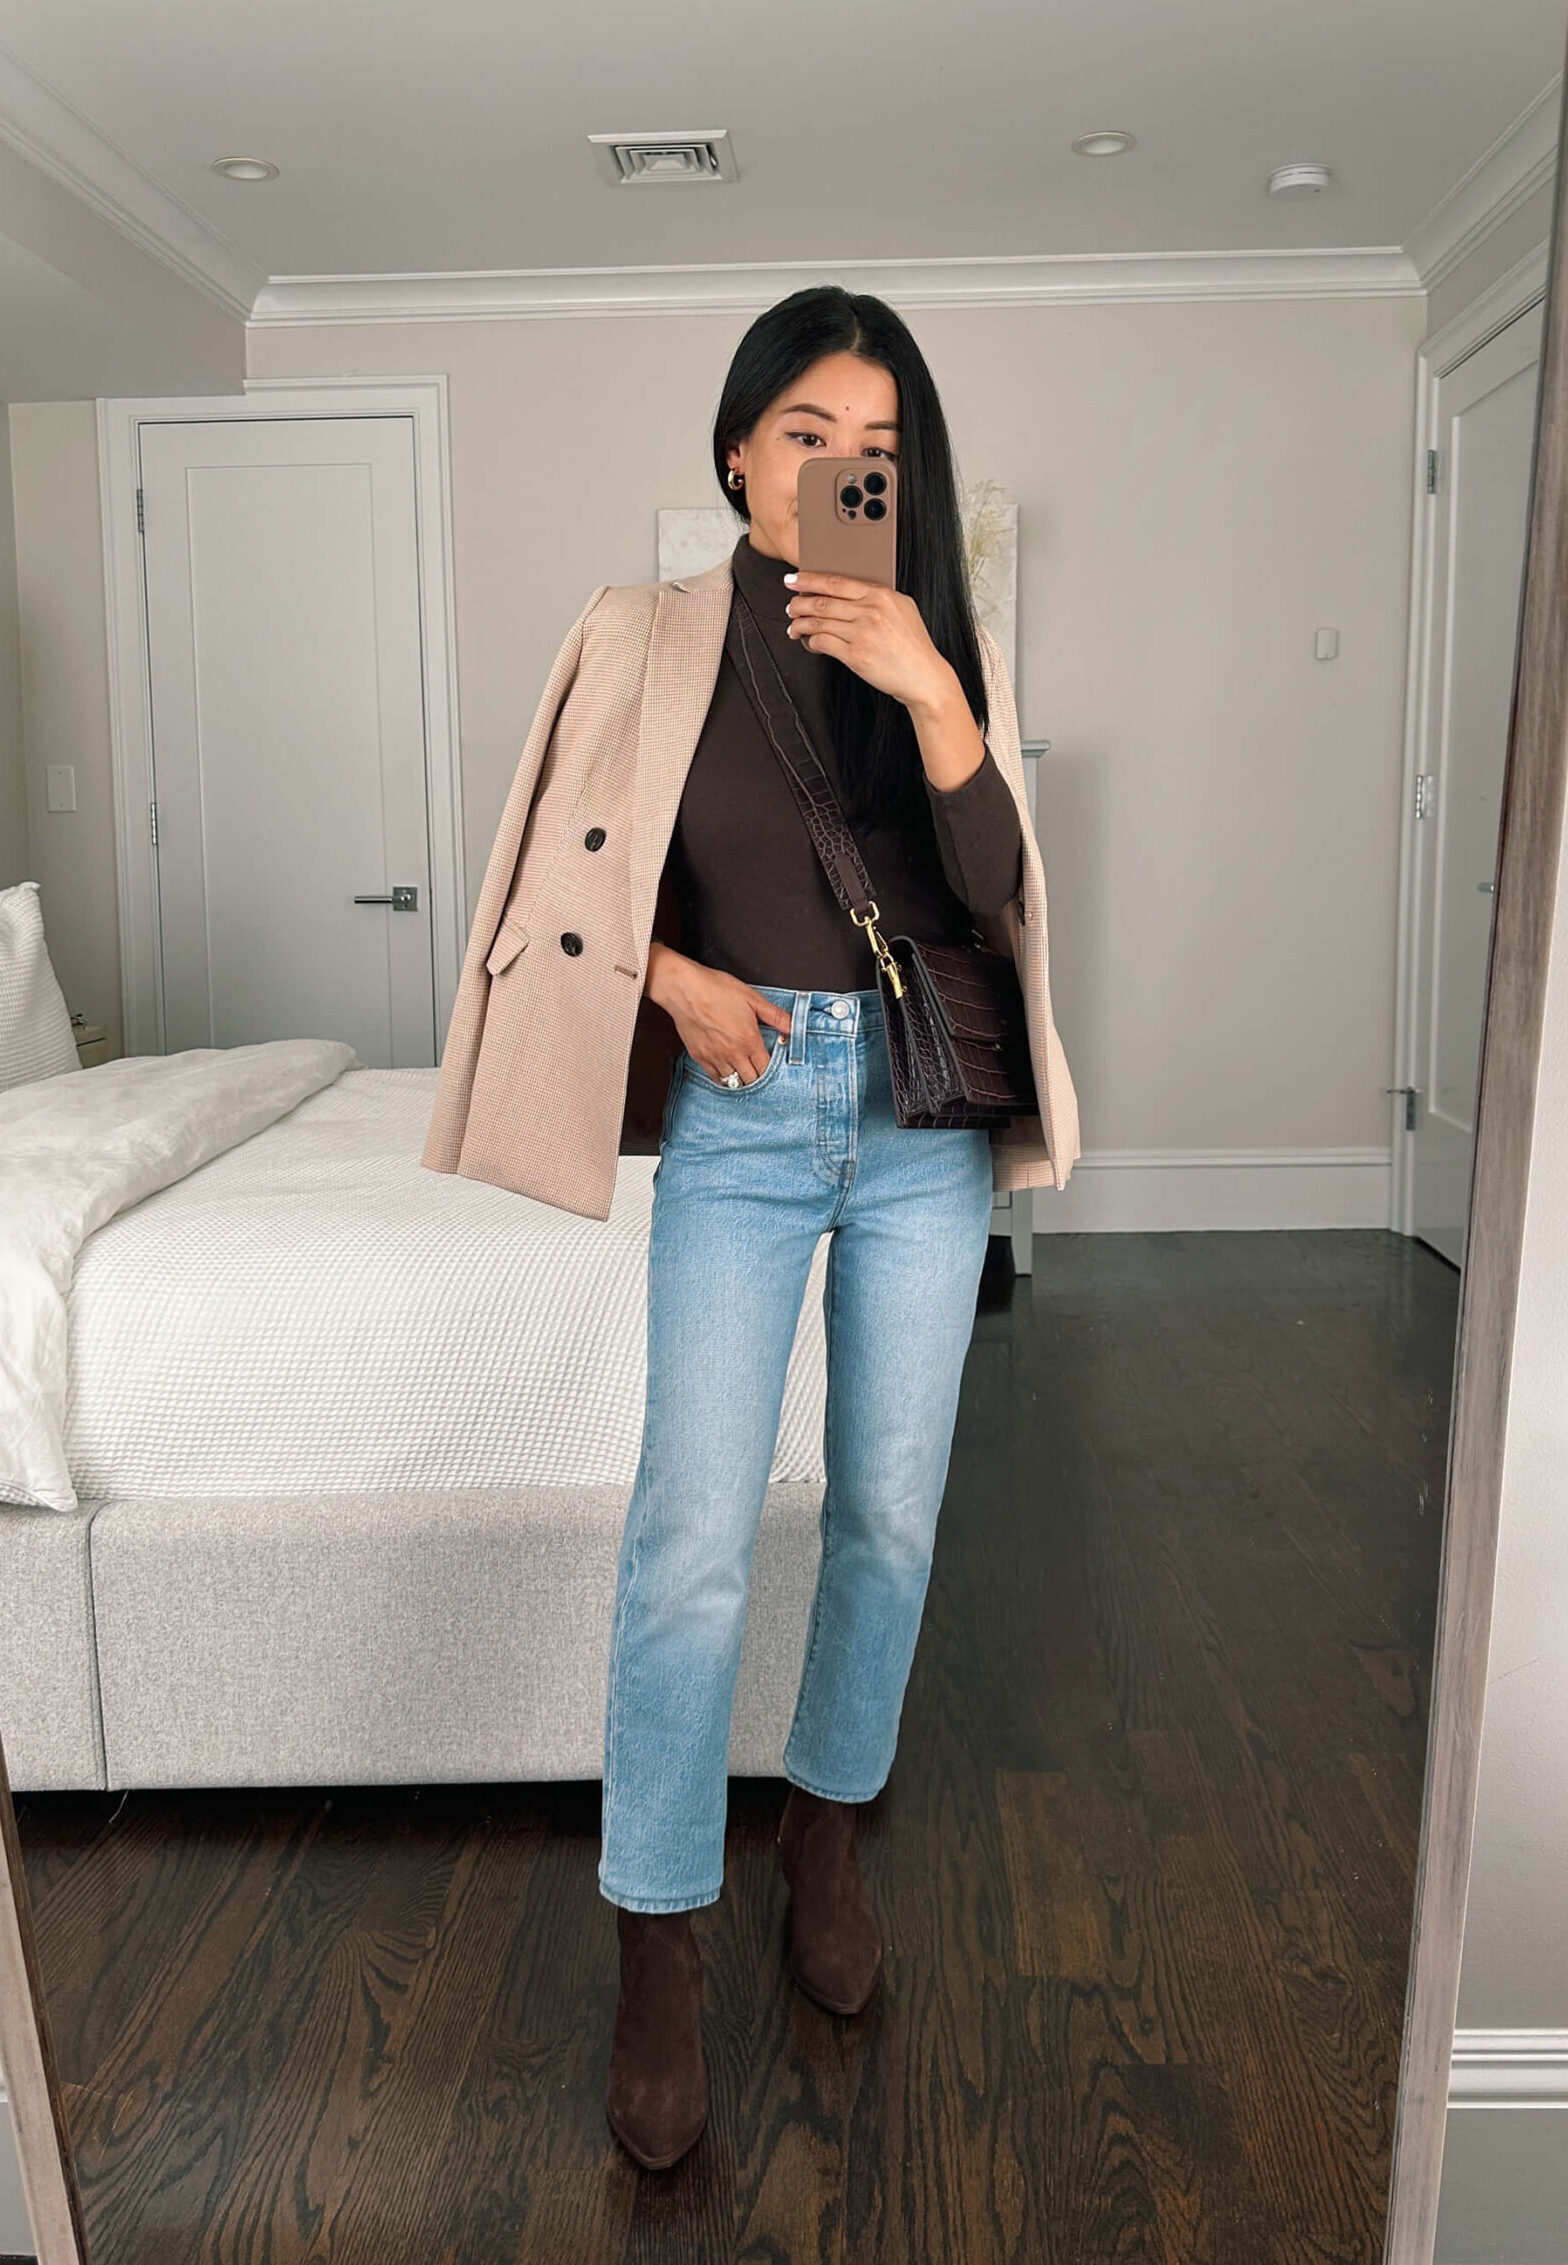 How To Wear Ankle Boots With Jeans This Winter - Style by Savina  Winter  fashion outfits casual, Casual winter outfits, Winter boots outfits